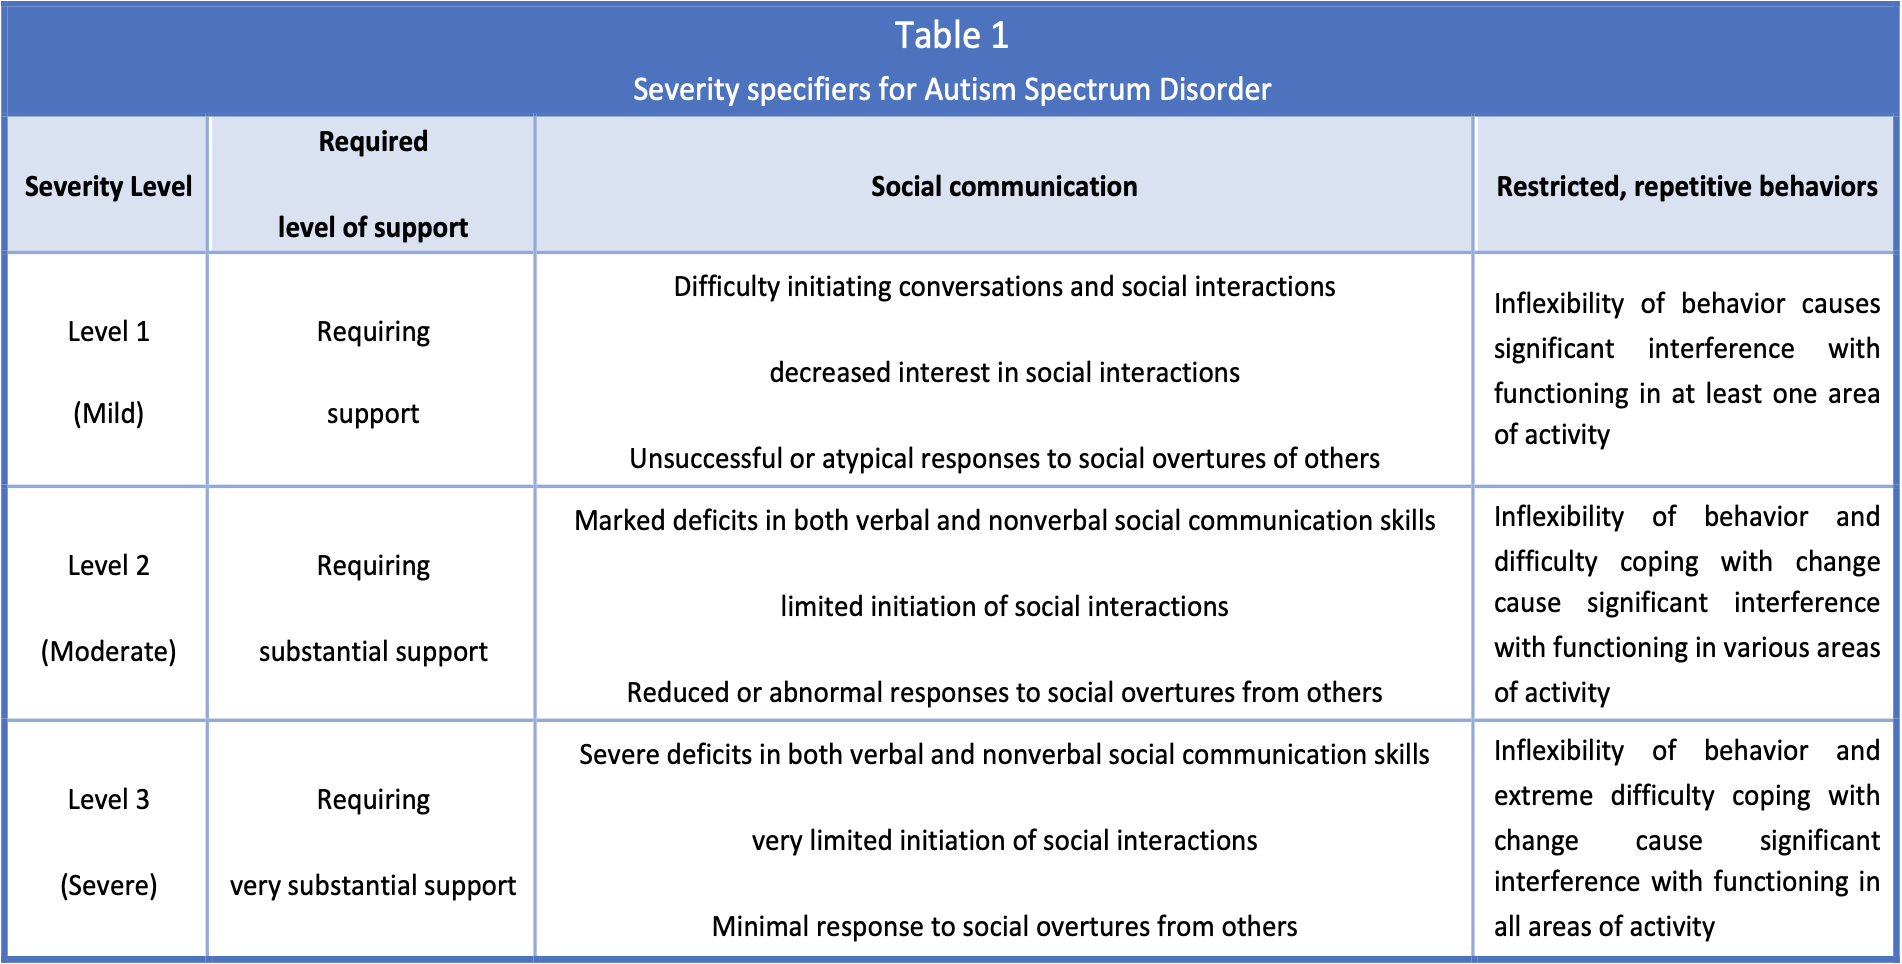 Severity specifiers for Autism Spectrum Disorder